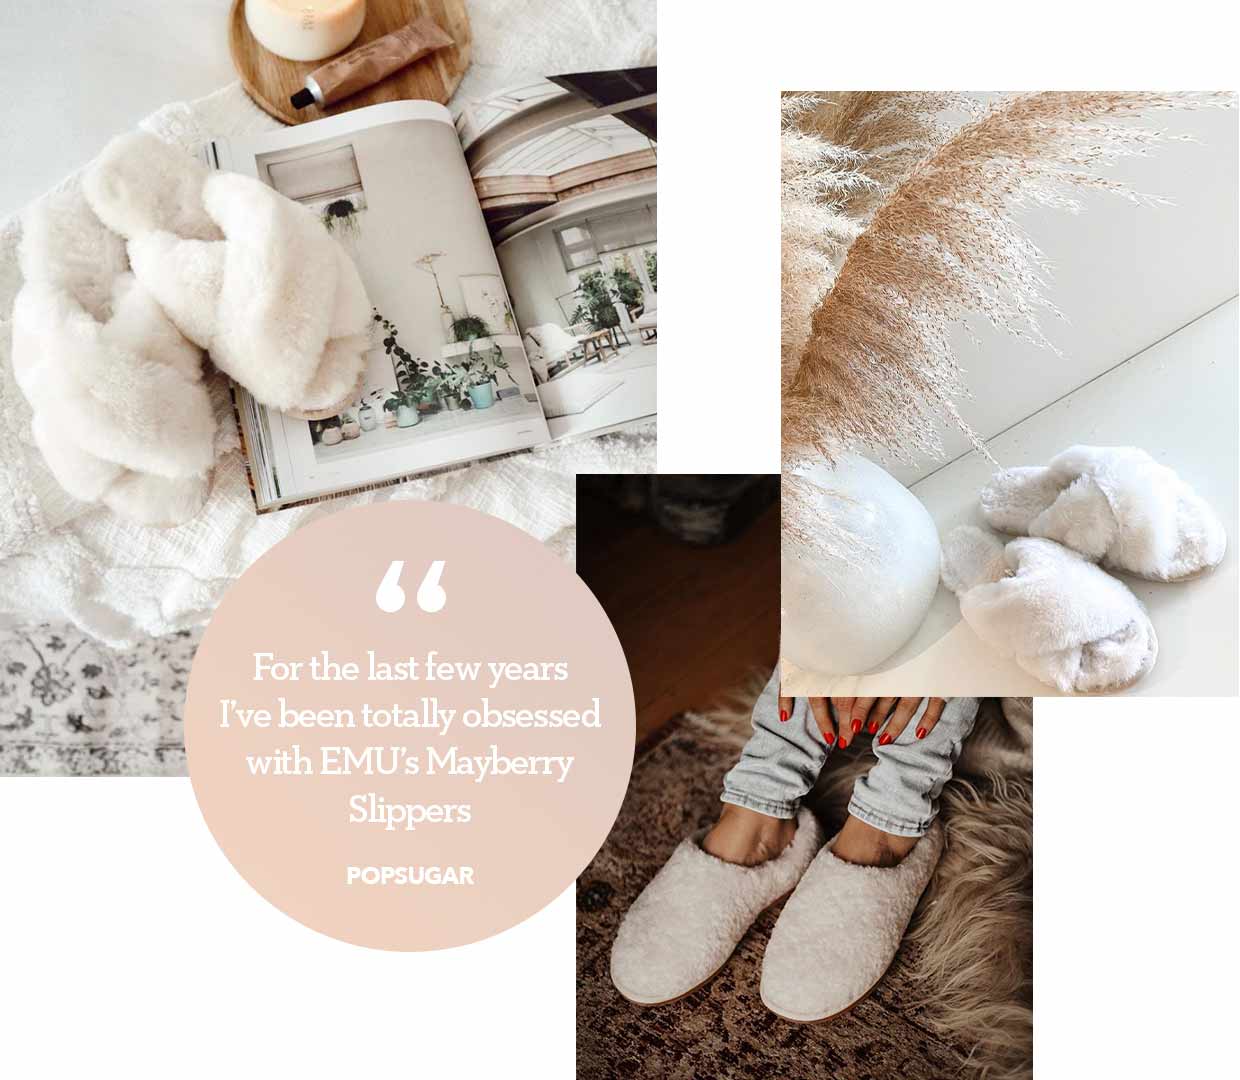 'For the last few years I've been totally obsessed with EMU Australia's Mayberry slippers - POPSUGAR QUOTE', EMU Australia Mayberry slippers on blanket next to magazine and candle